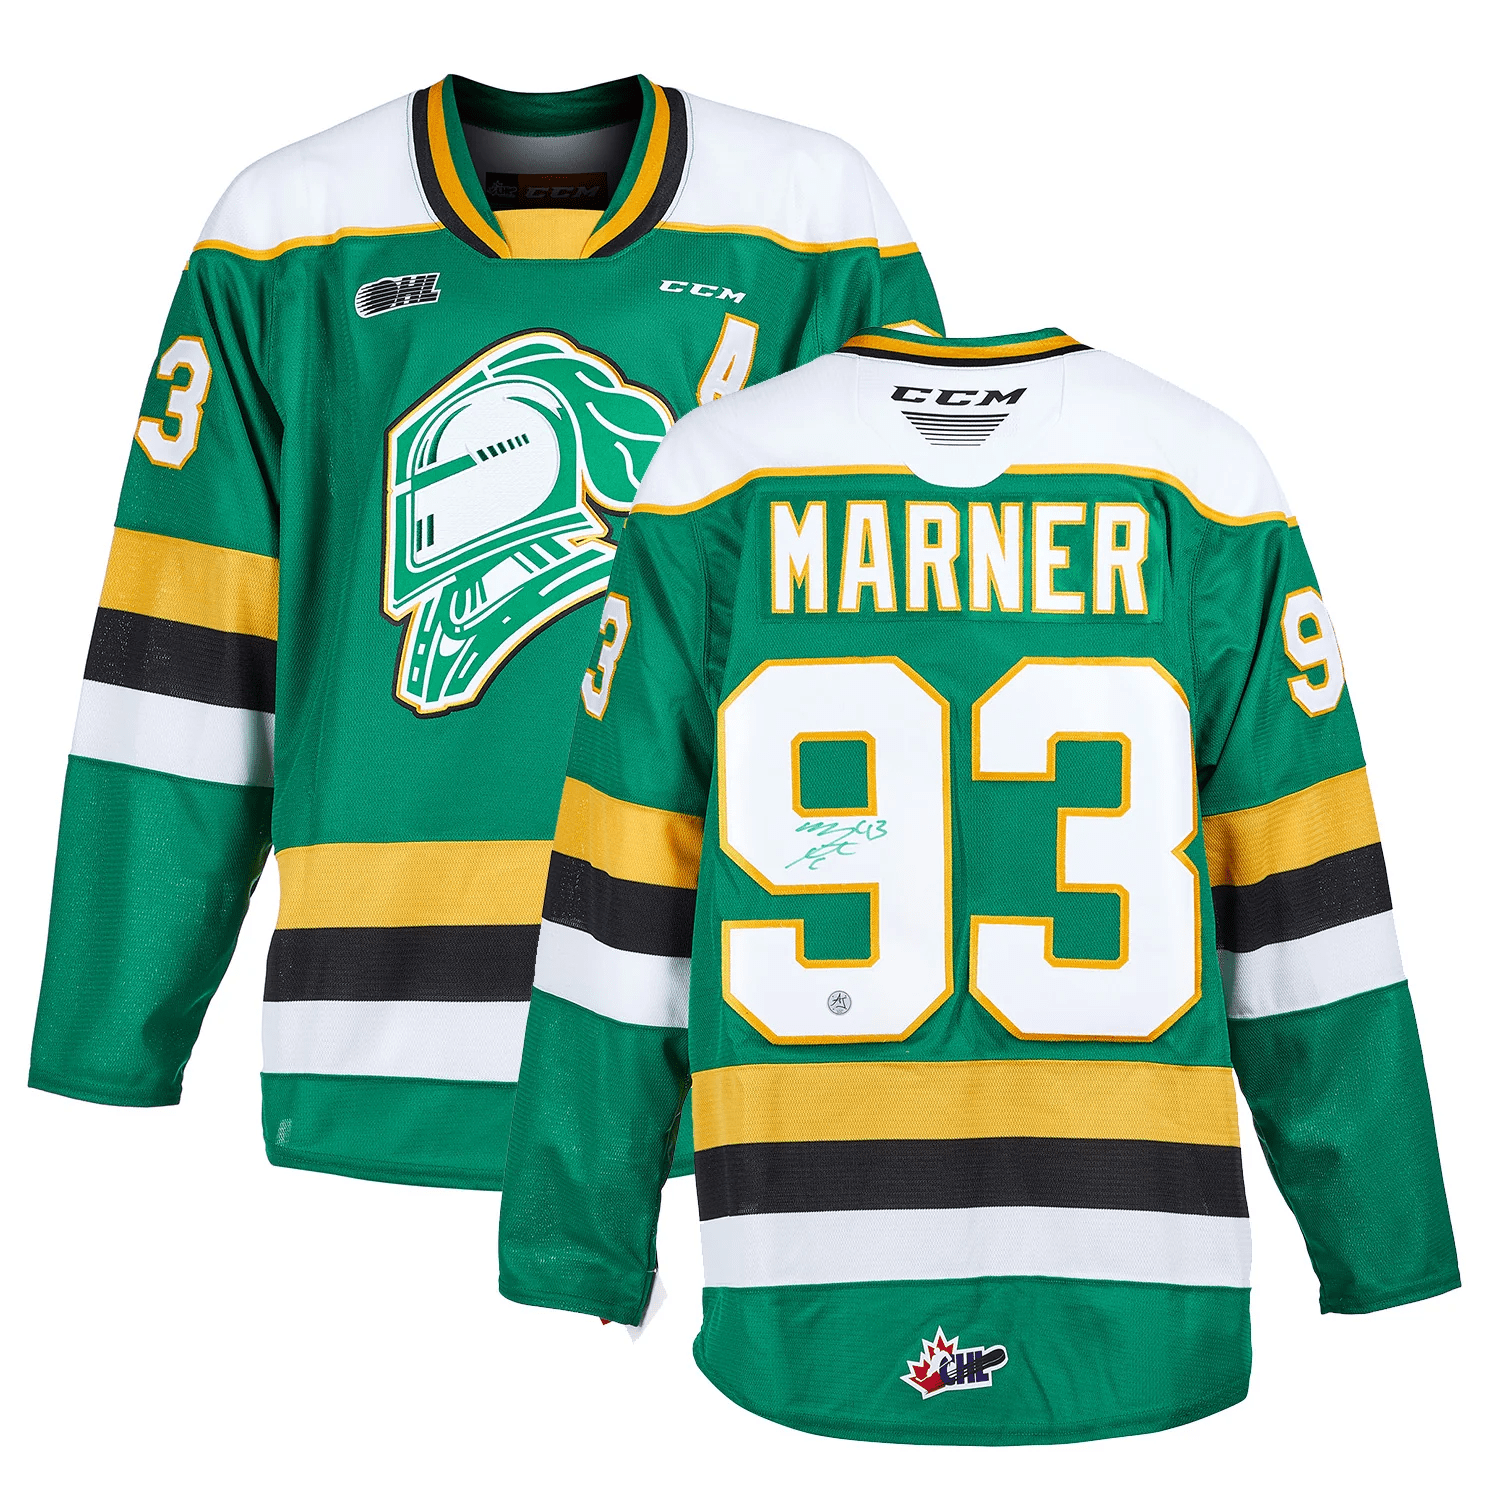 Mitch Marner London Knights Autographed Jersey